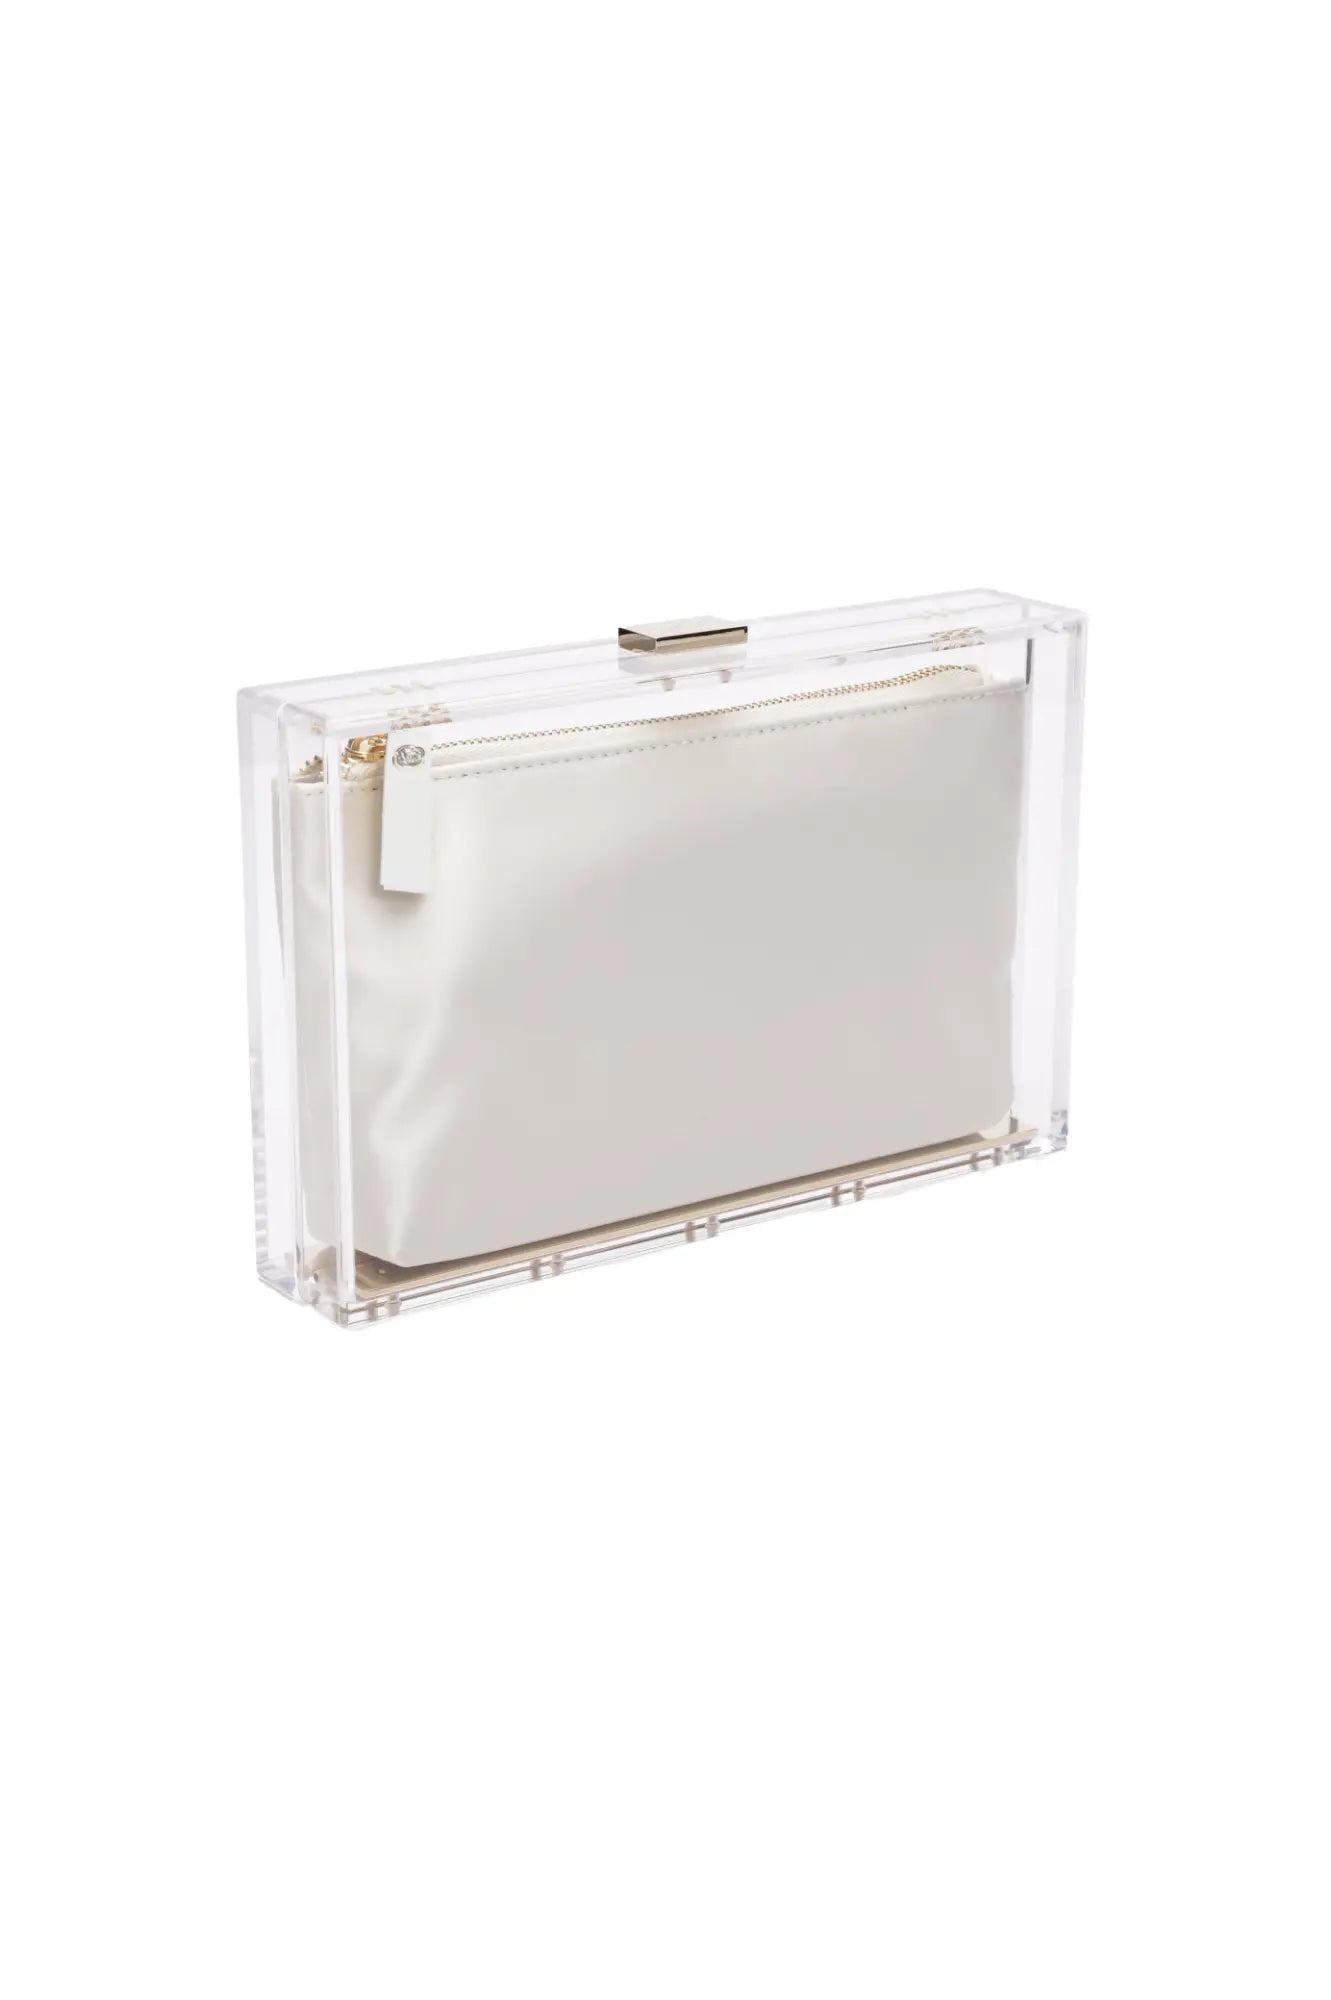 Italian Mia Acrylic Clutch with Ivory Satin Zipper Pouch from The Bella Rosa Collection with metallic clasp and white interior satin pouch.